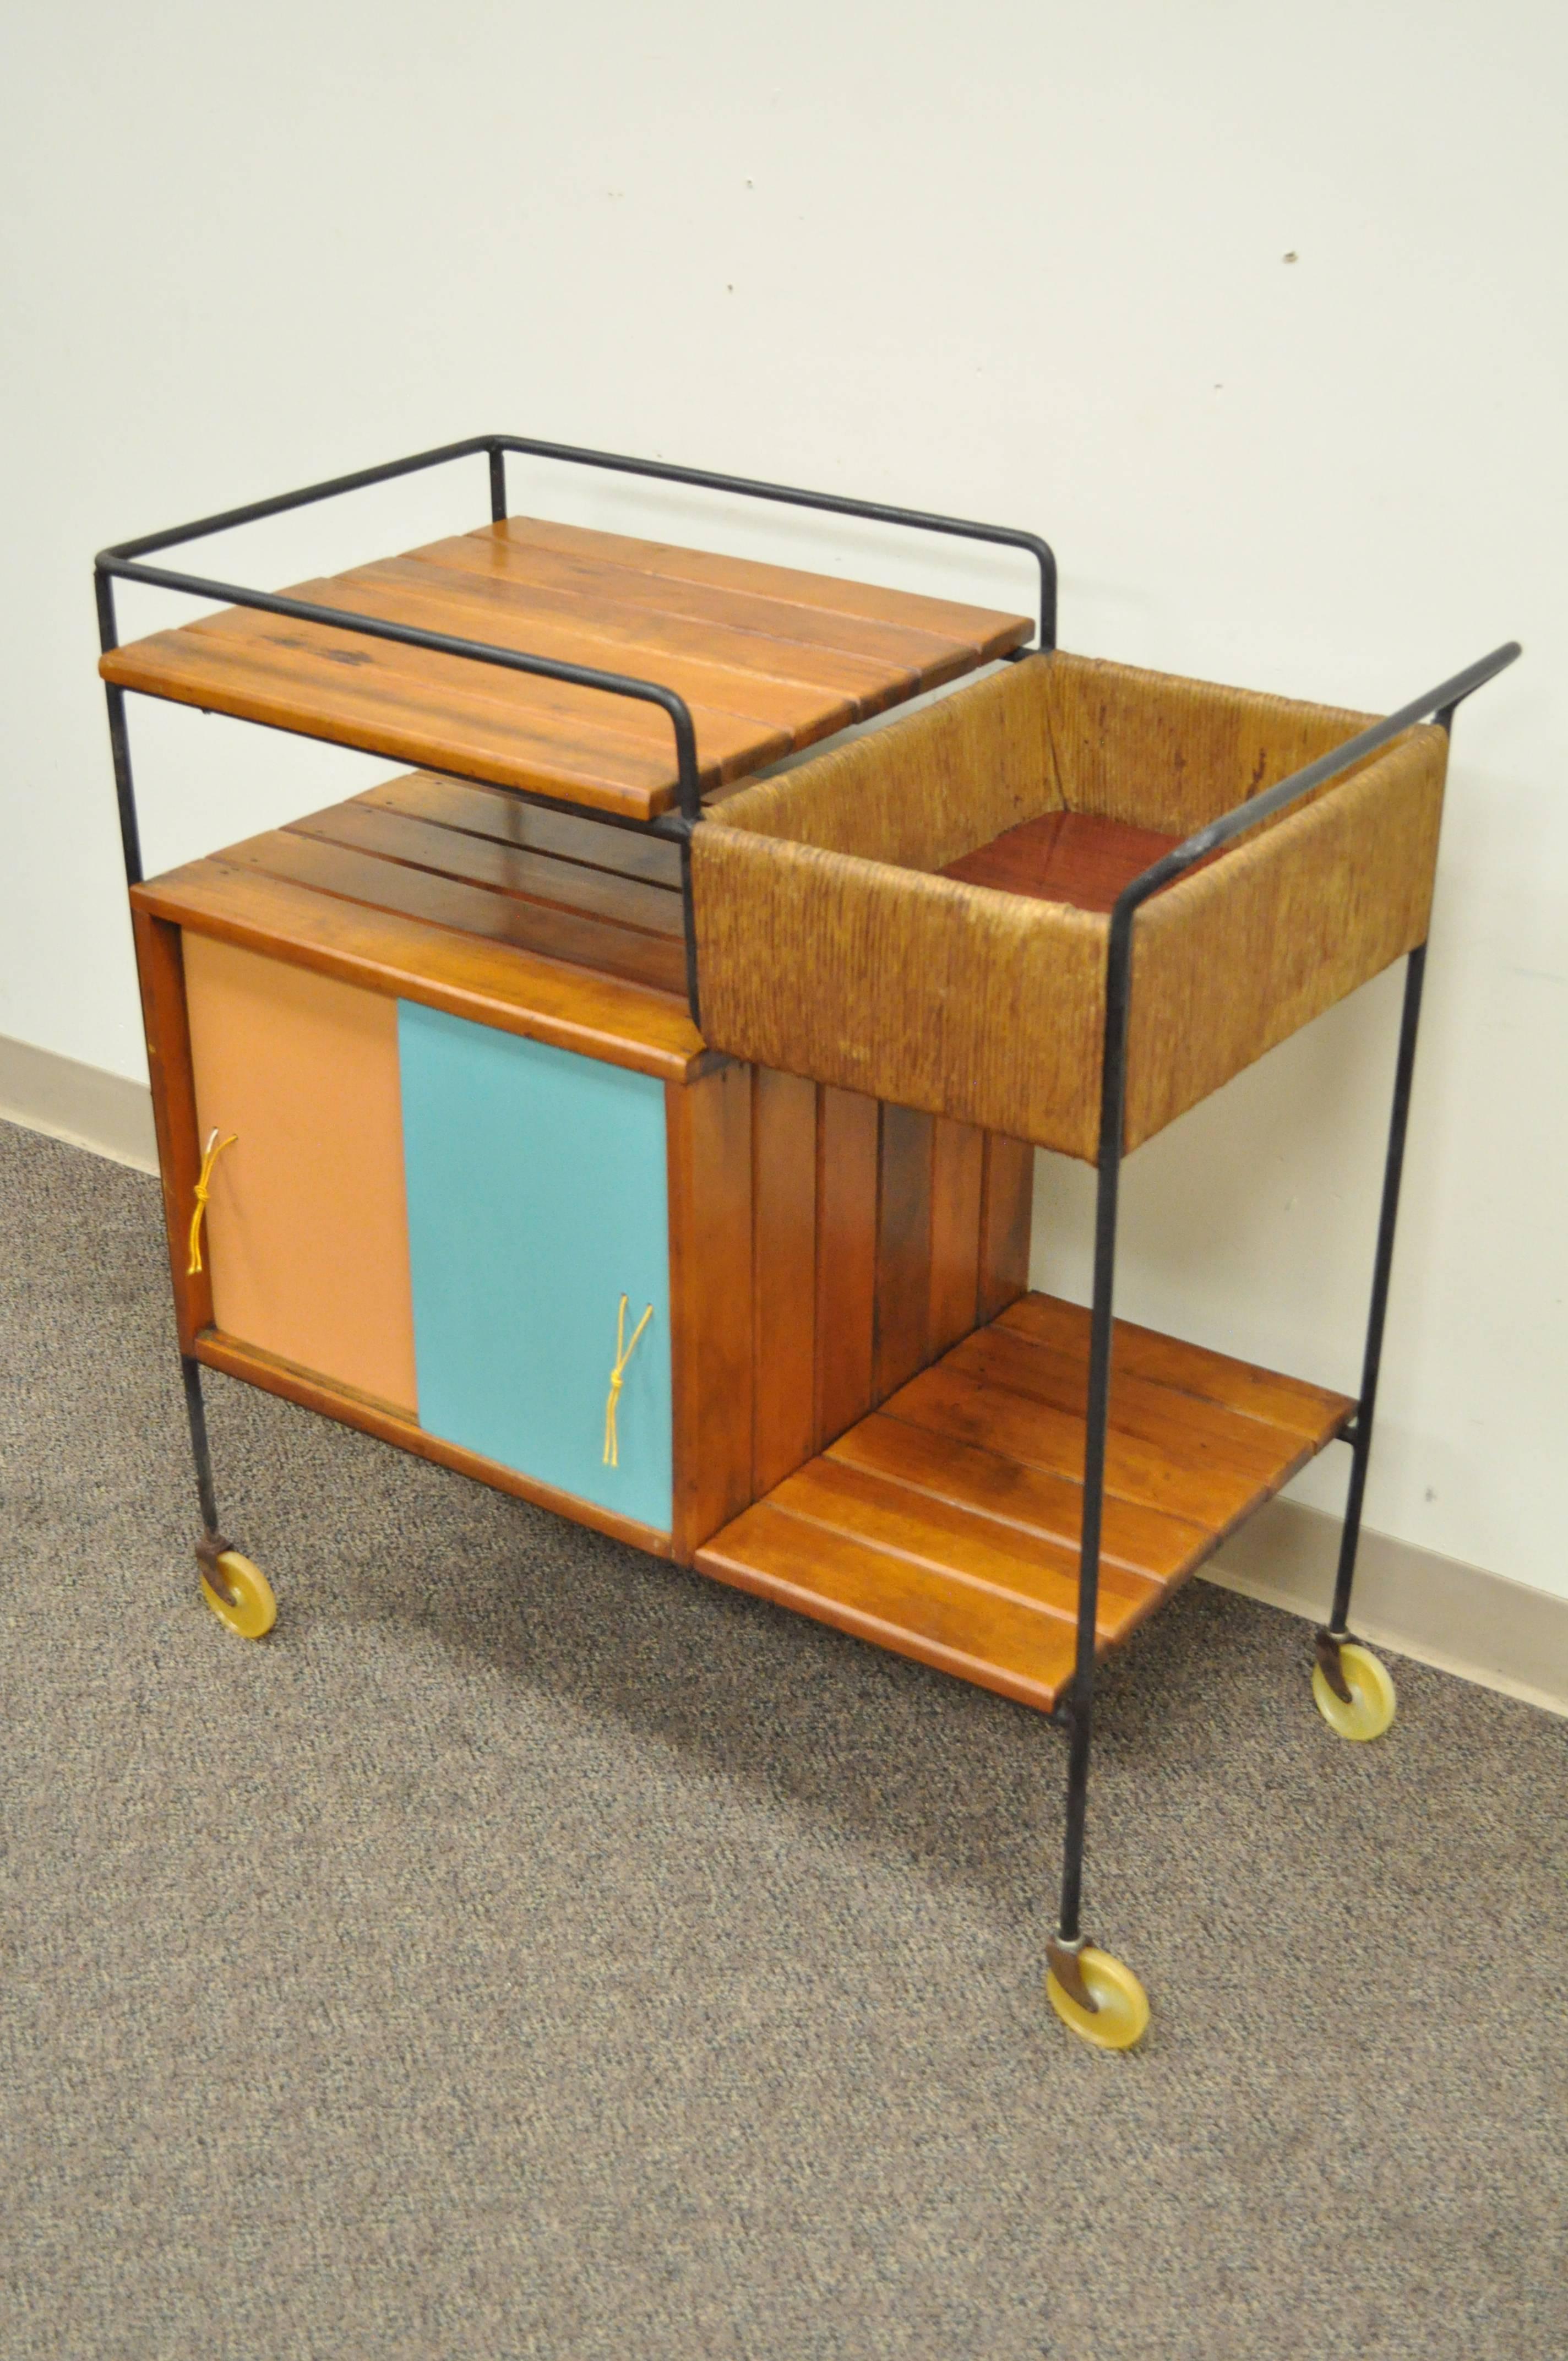 Vintage Arthur Umanoff Mid-Century Modern tiki bar cart. Item features a wrought iron frame, solid wood slatted surfaces, woven rush upper cubby and four blue and orange sliding doors with leather pulls. Great original vintage condition.